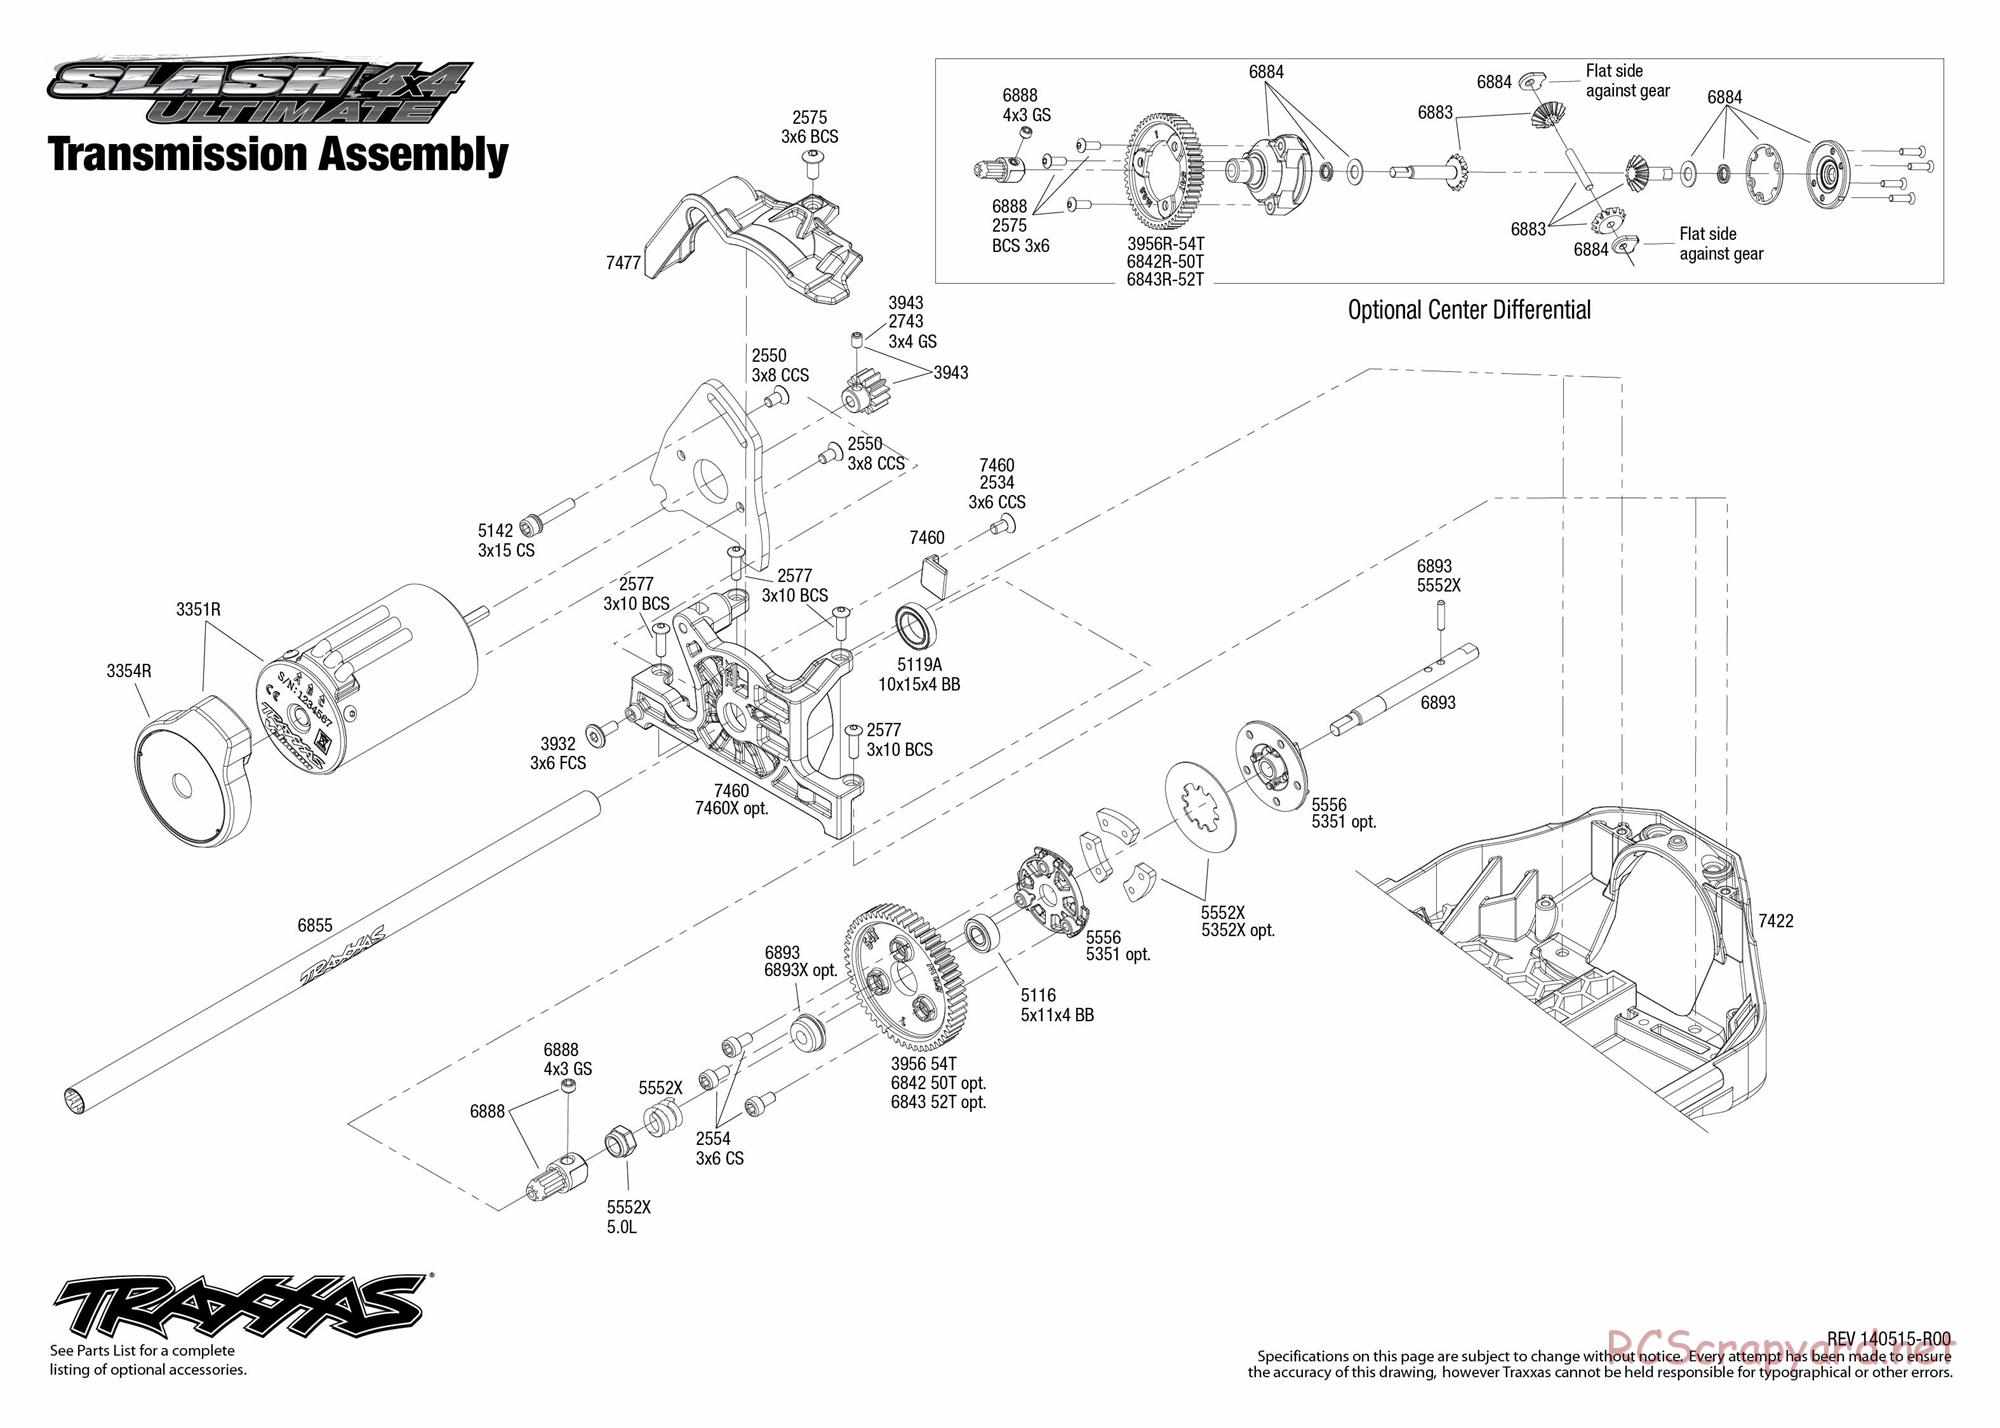 Traxxas - Slash 4x4 Ultimate (2014) - Exploded Views - Page 5